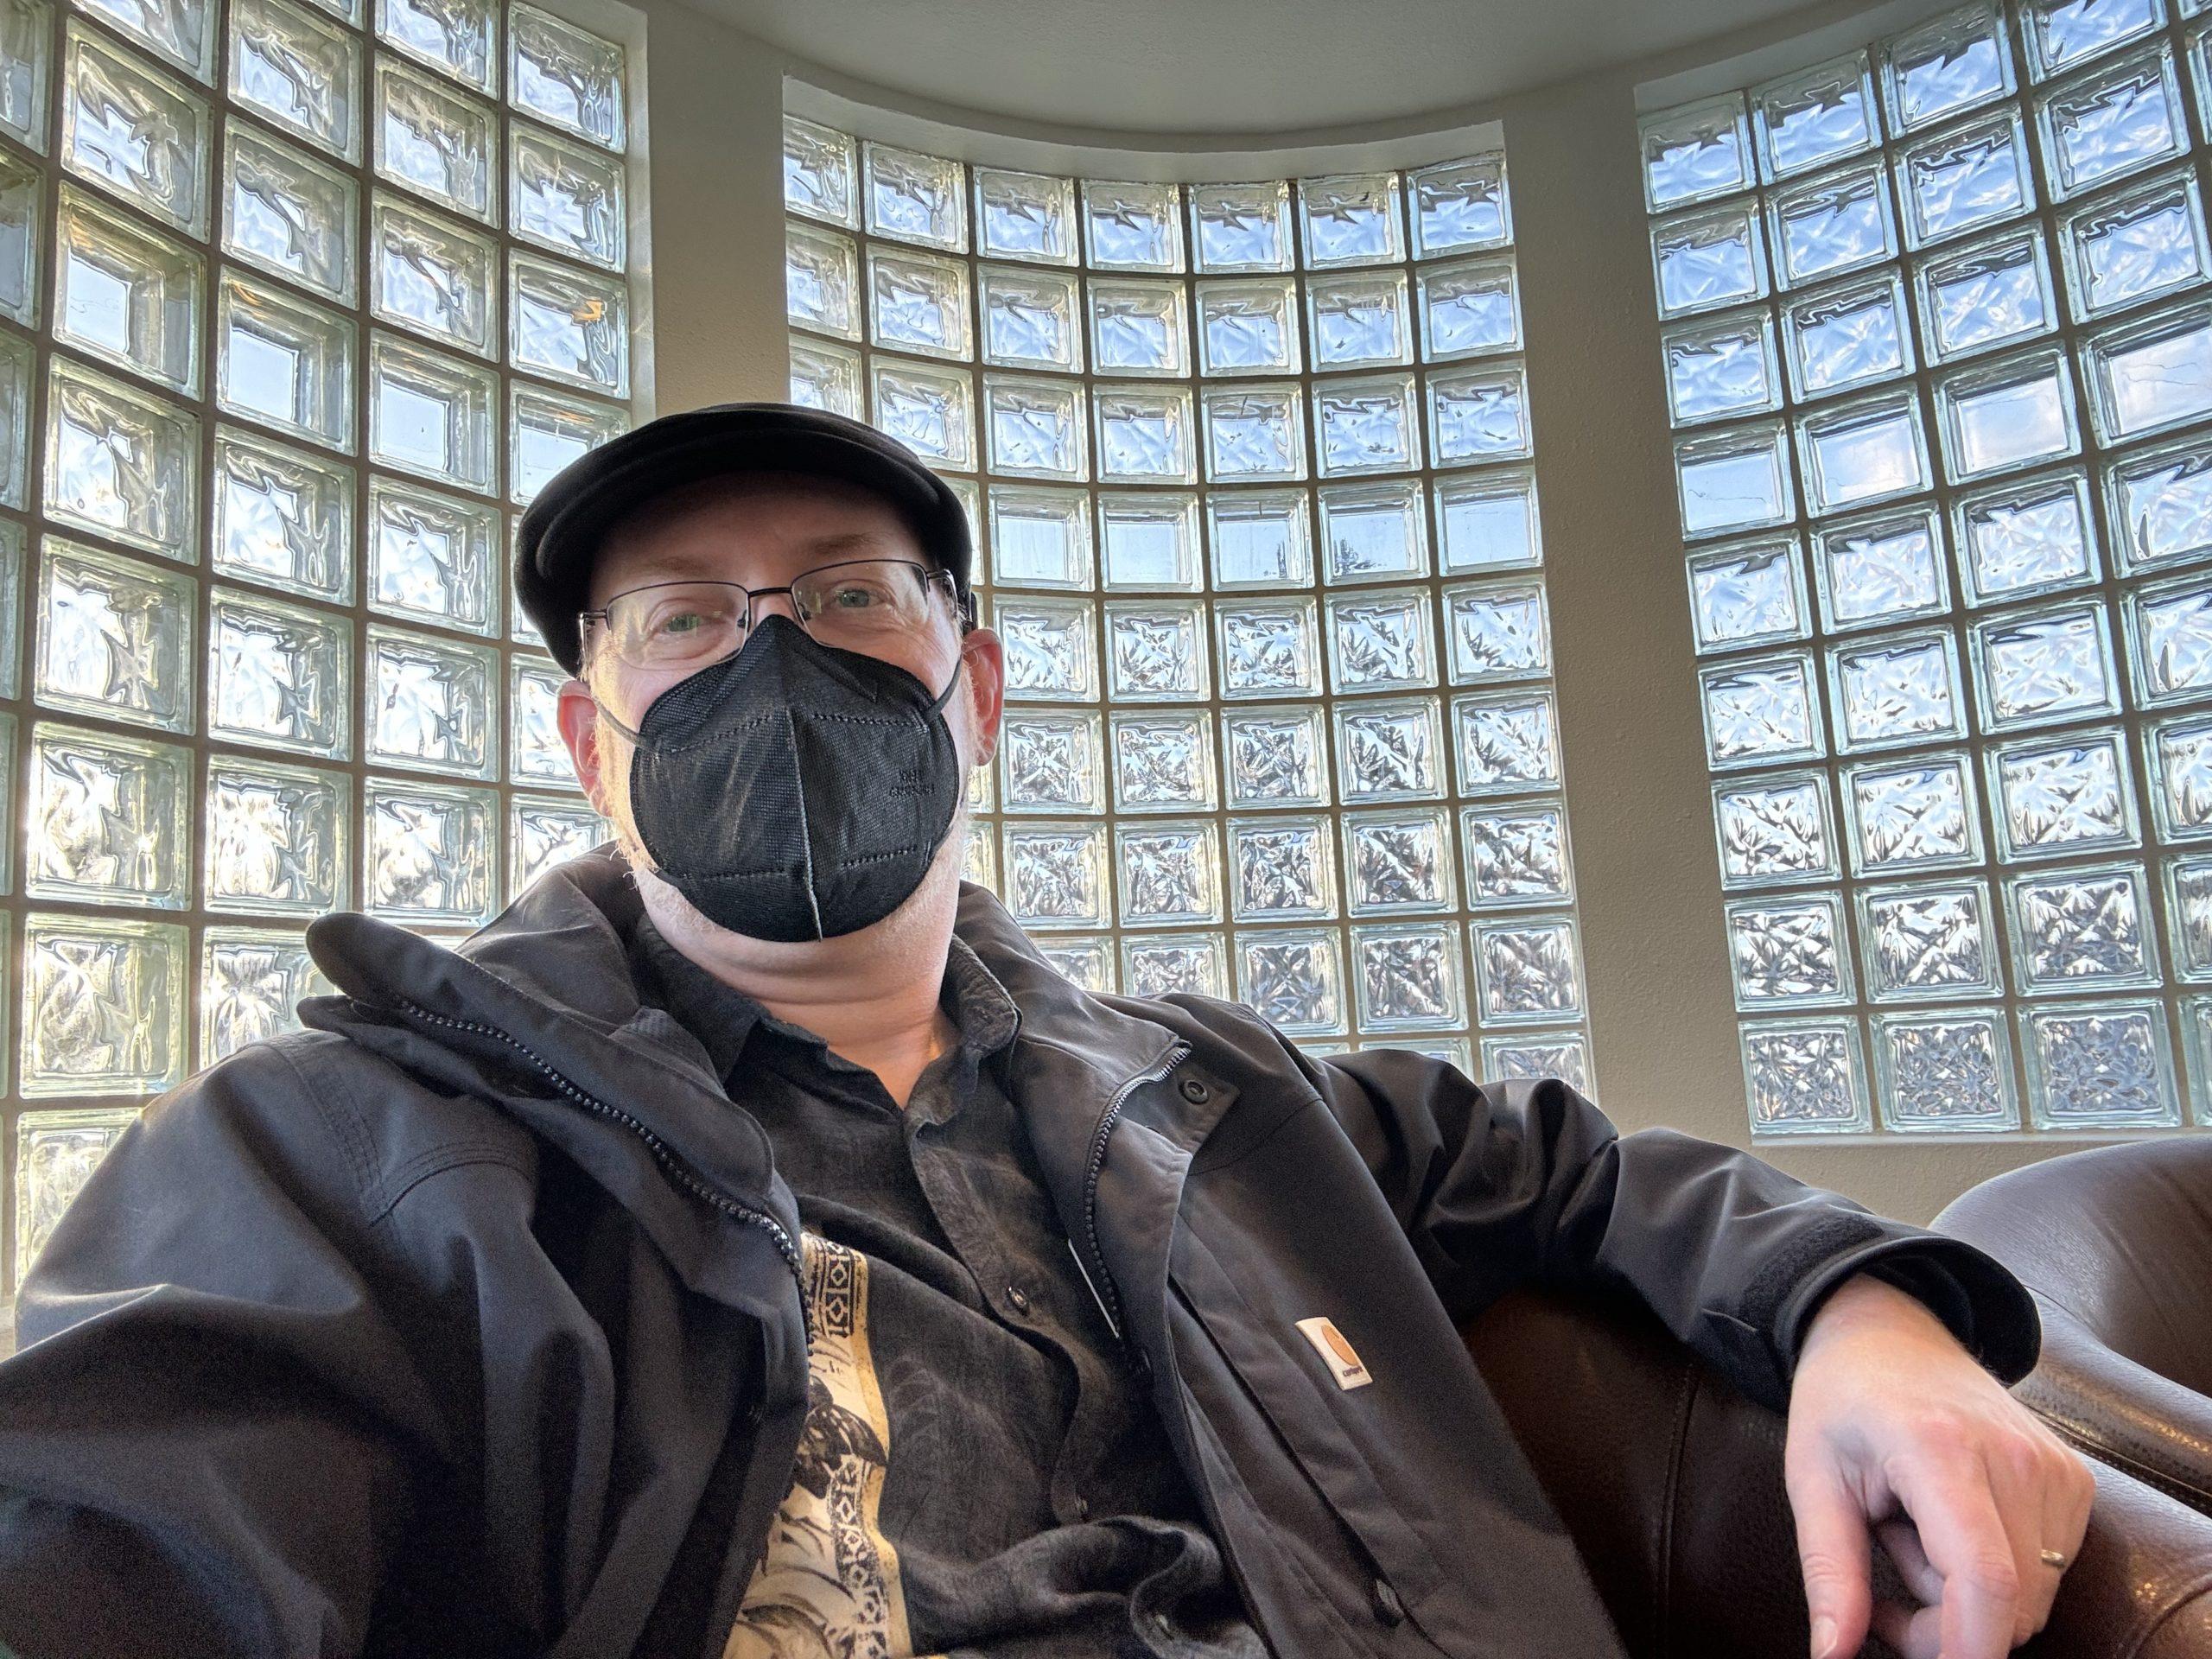 Me, wearing coat, hat, and face mask, sitting in front of a curved glass brick wall.